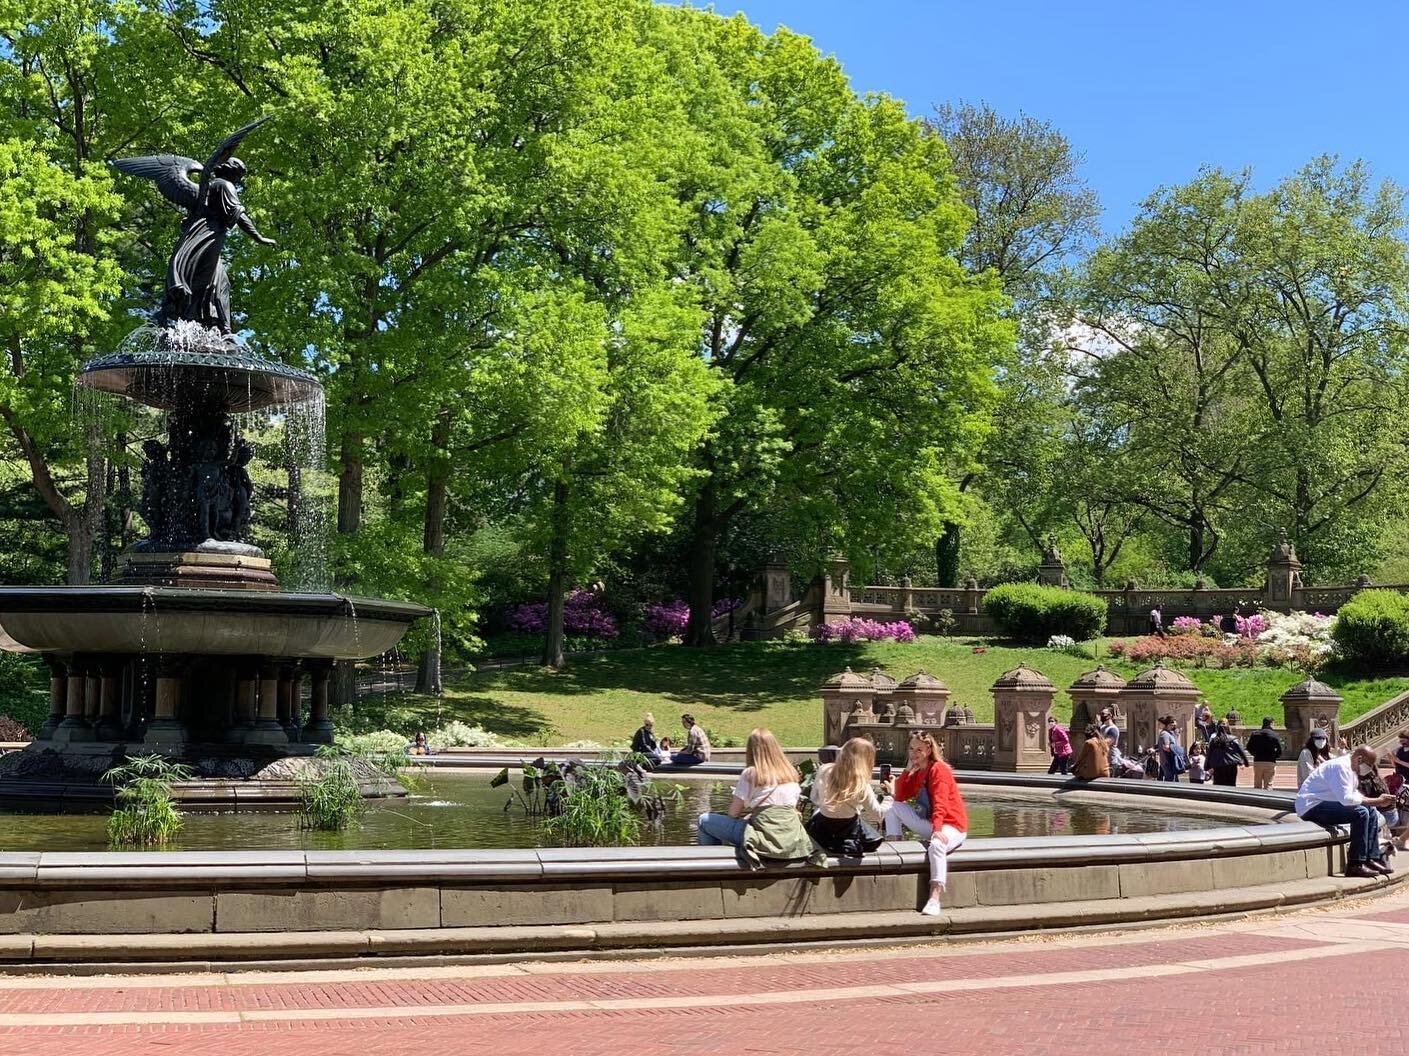 Central Park, the great escape from the city hustle and bustle.

A recent review of our Central Park tour said: &quot;Walk, talk, listen, and learn! Jeremy is a knowledgeable and lively guide who taught us to appreciate the many aspects of Central Pa